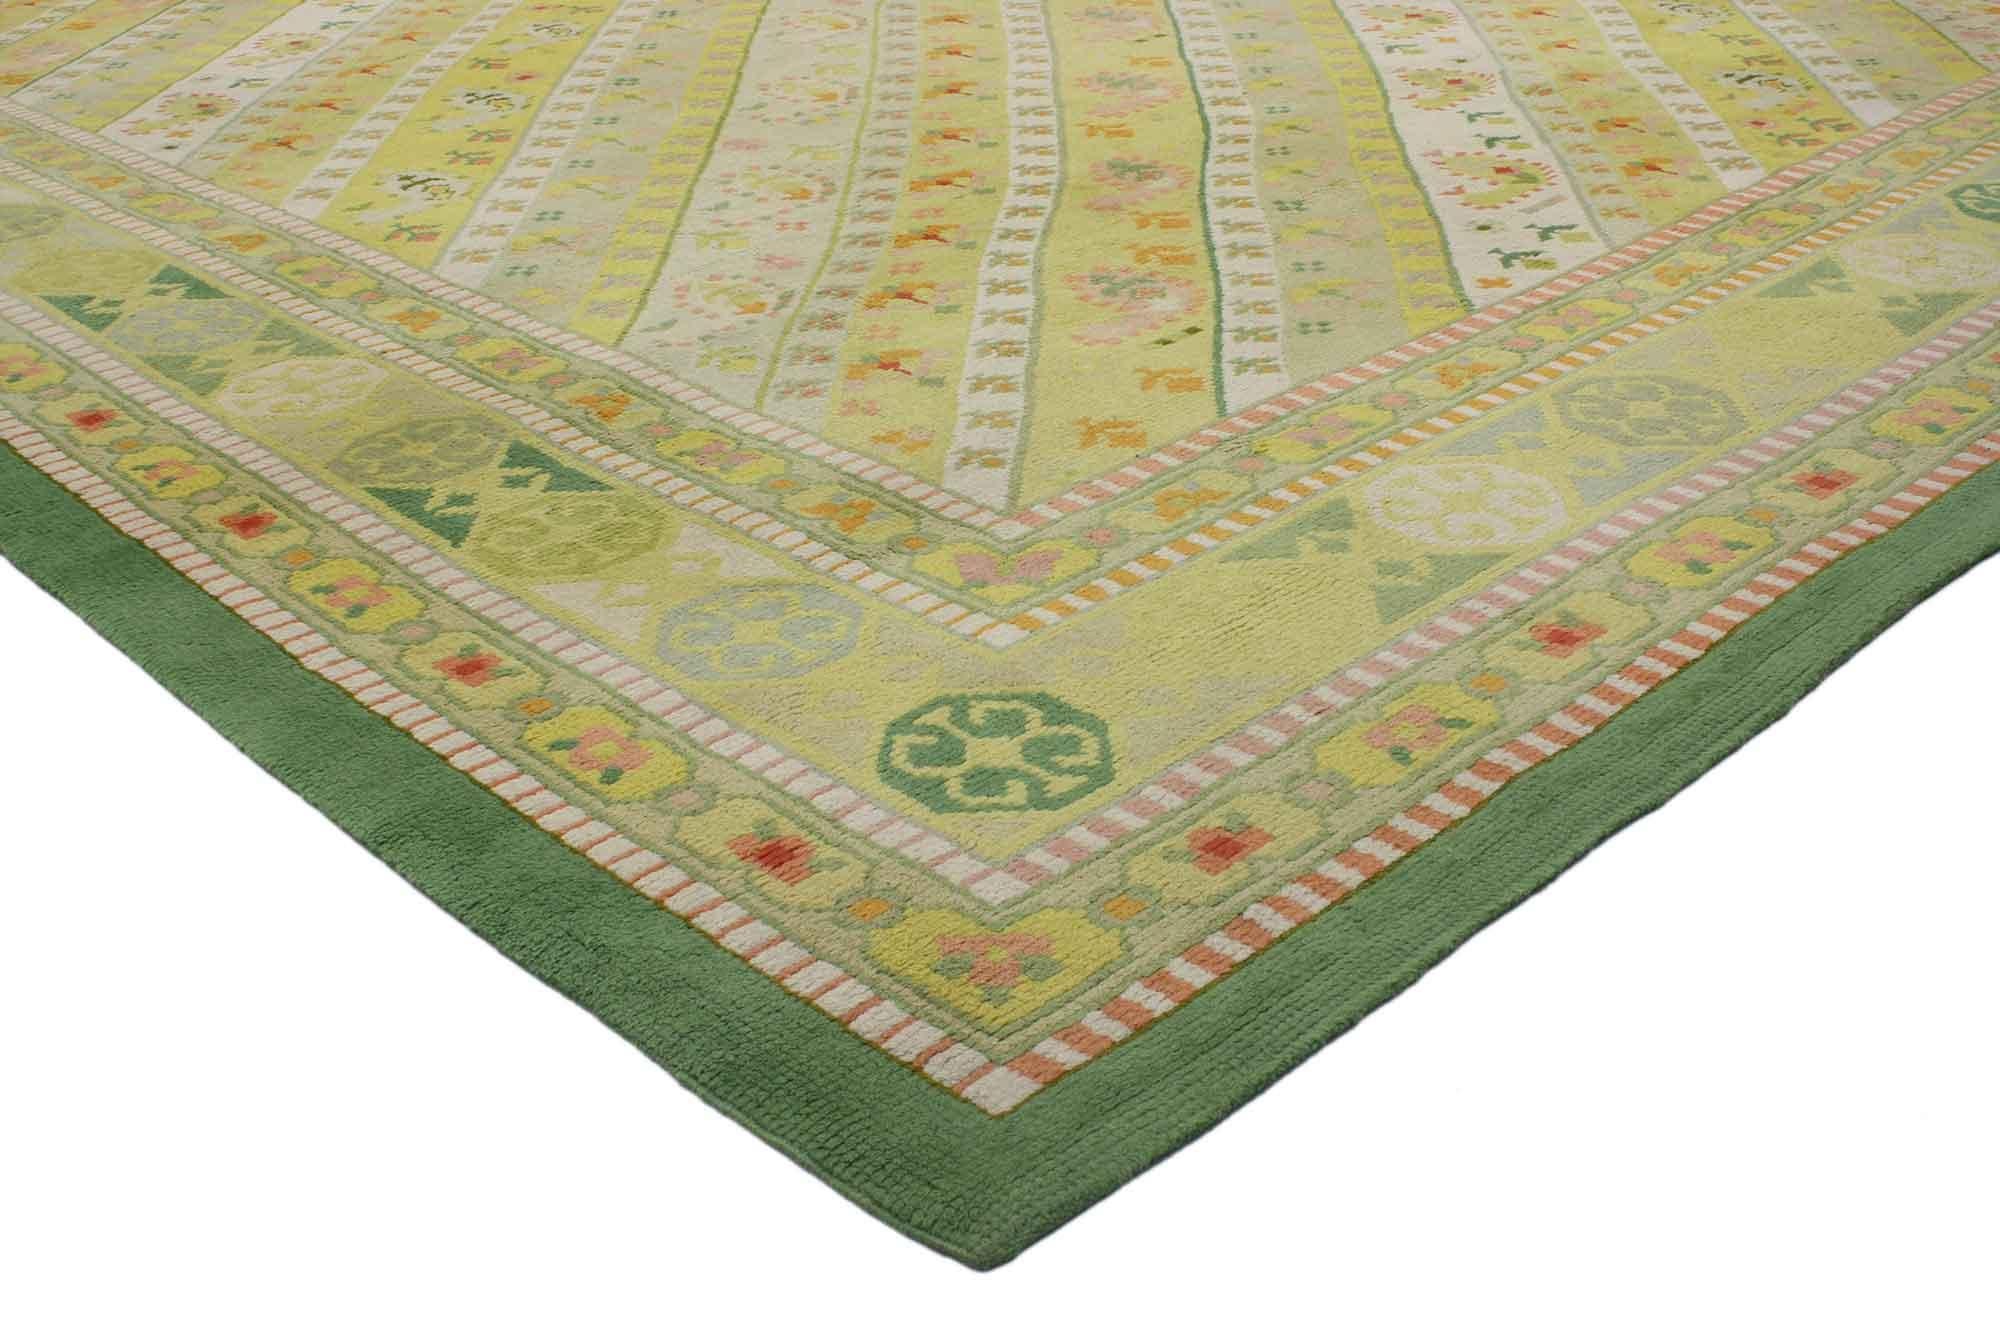 76742 Vintage Cuenca Spanish Rug, 12’01 x 14’11. Hand-knotted Spanish Cuenca rugs are luxurious, intricately designed rugs that originate from the city of Cuenca, Spain. These rugs are crafted through a meticulous process where skilled artisans